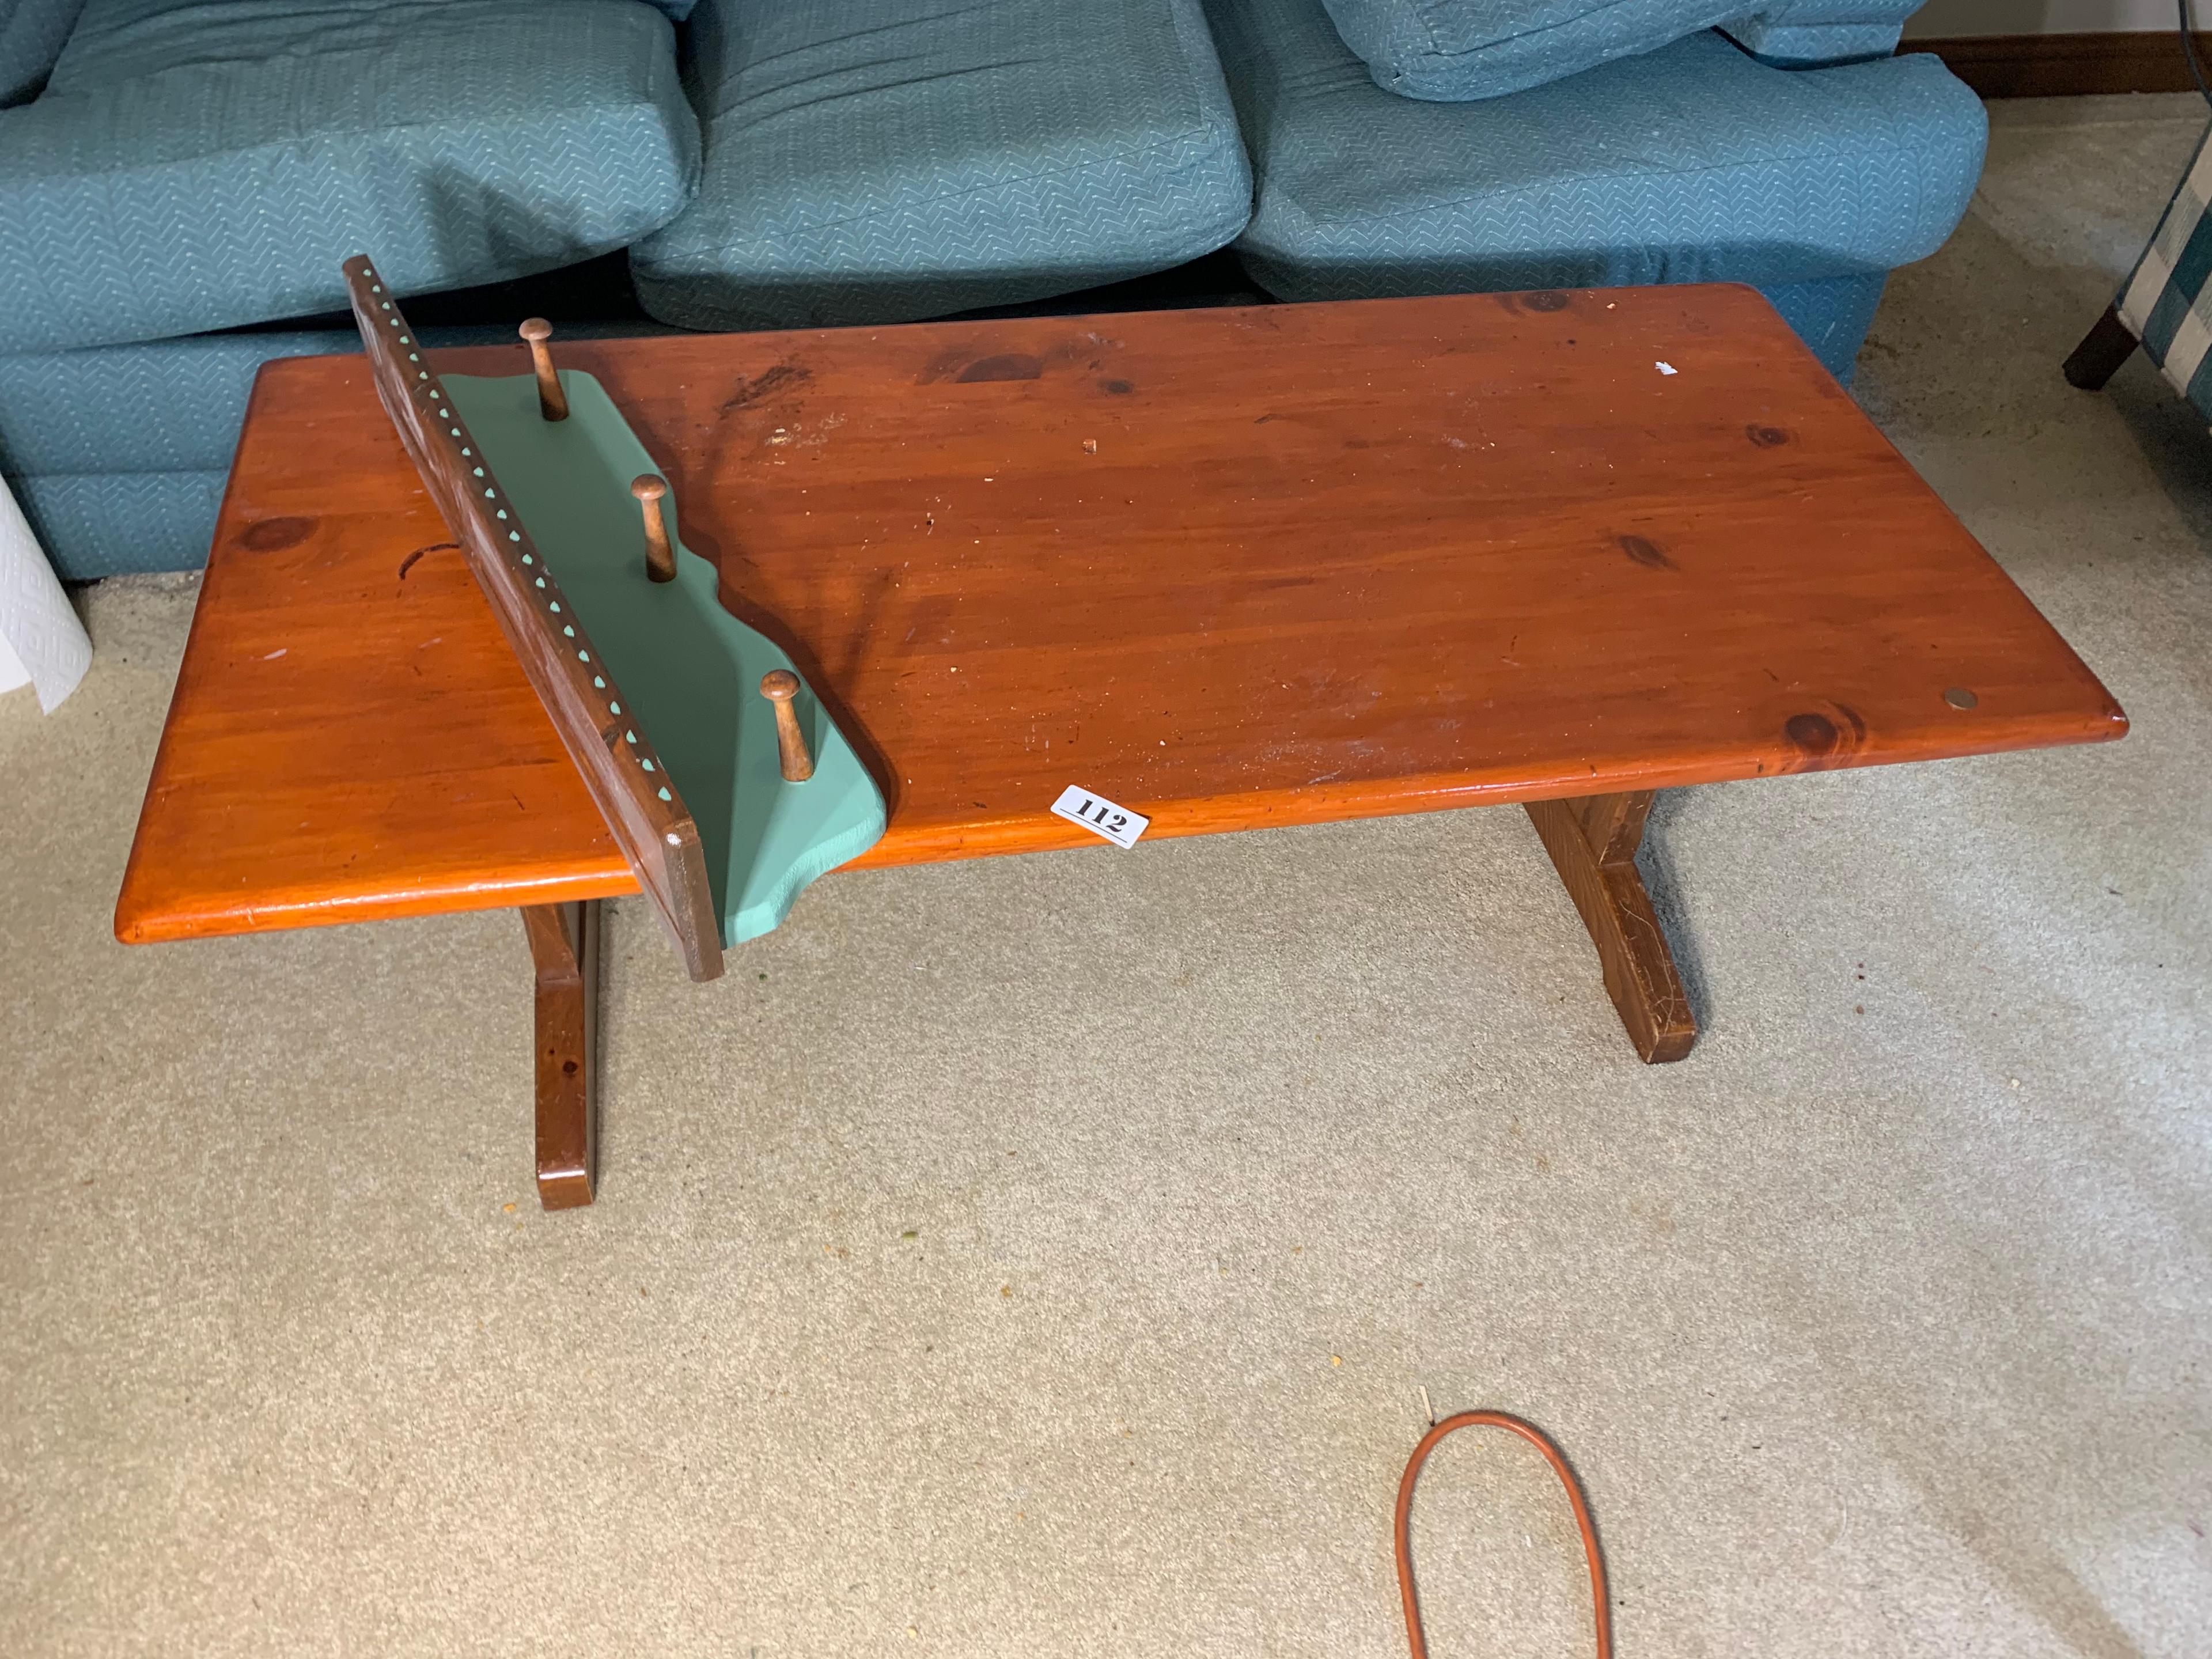 Wooden coffee table, small shelf